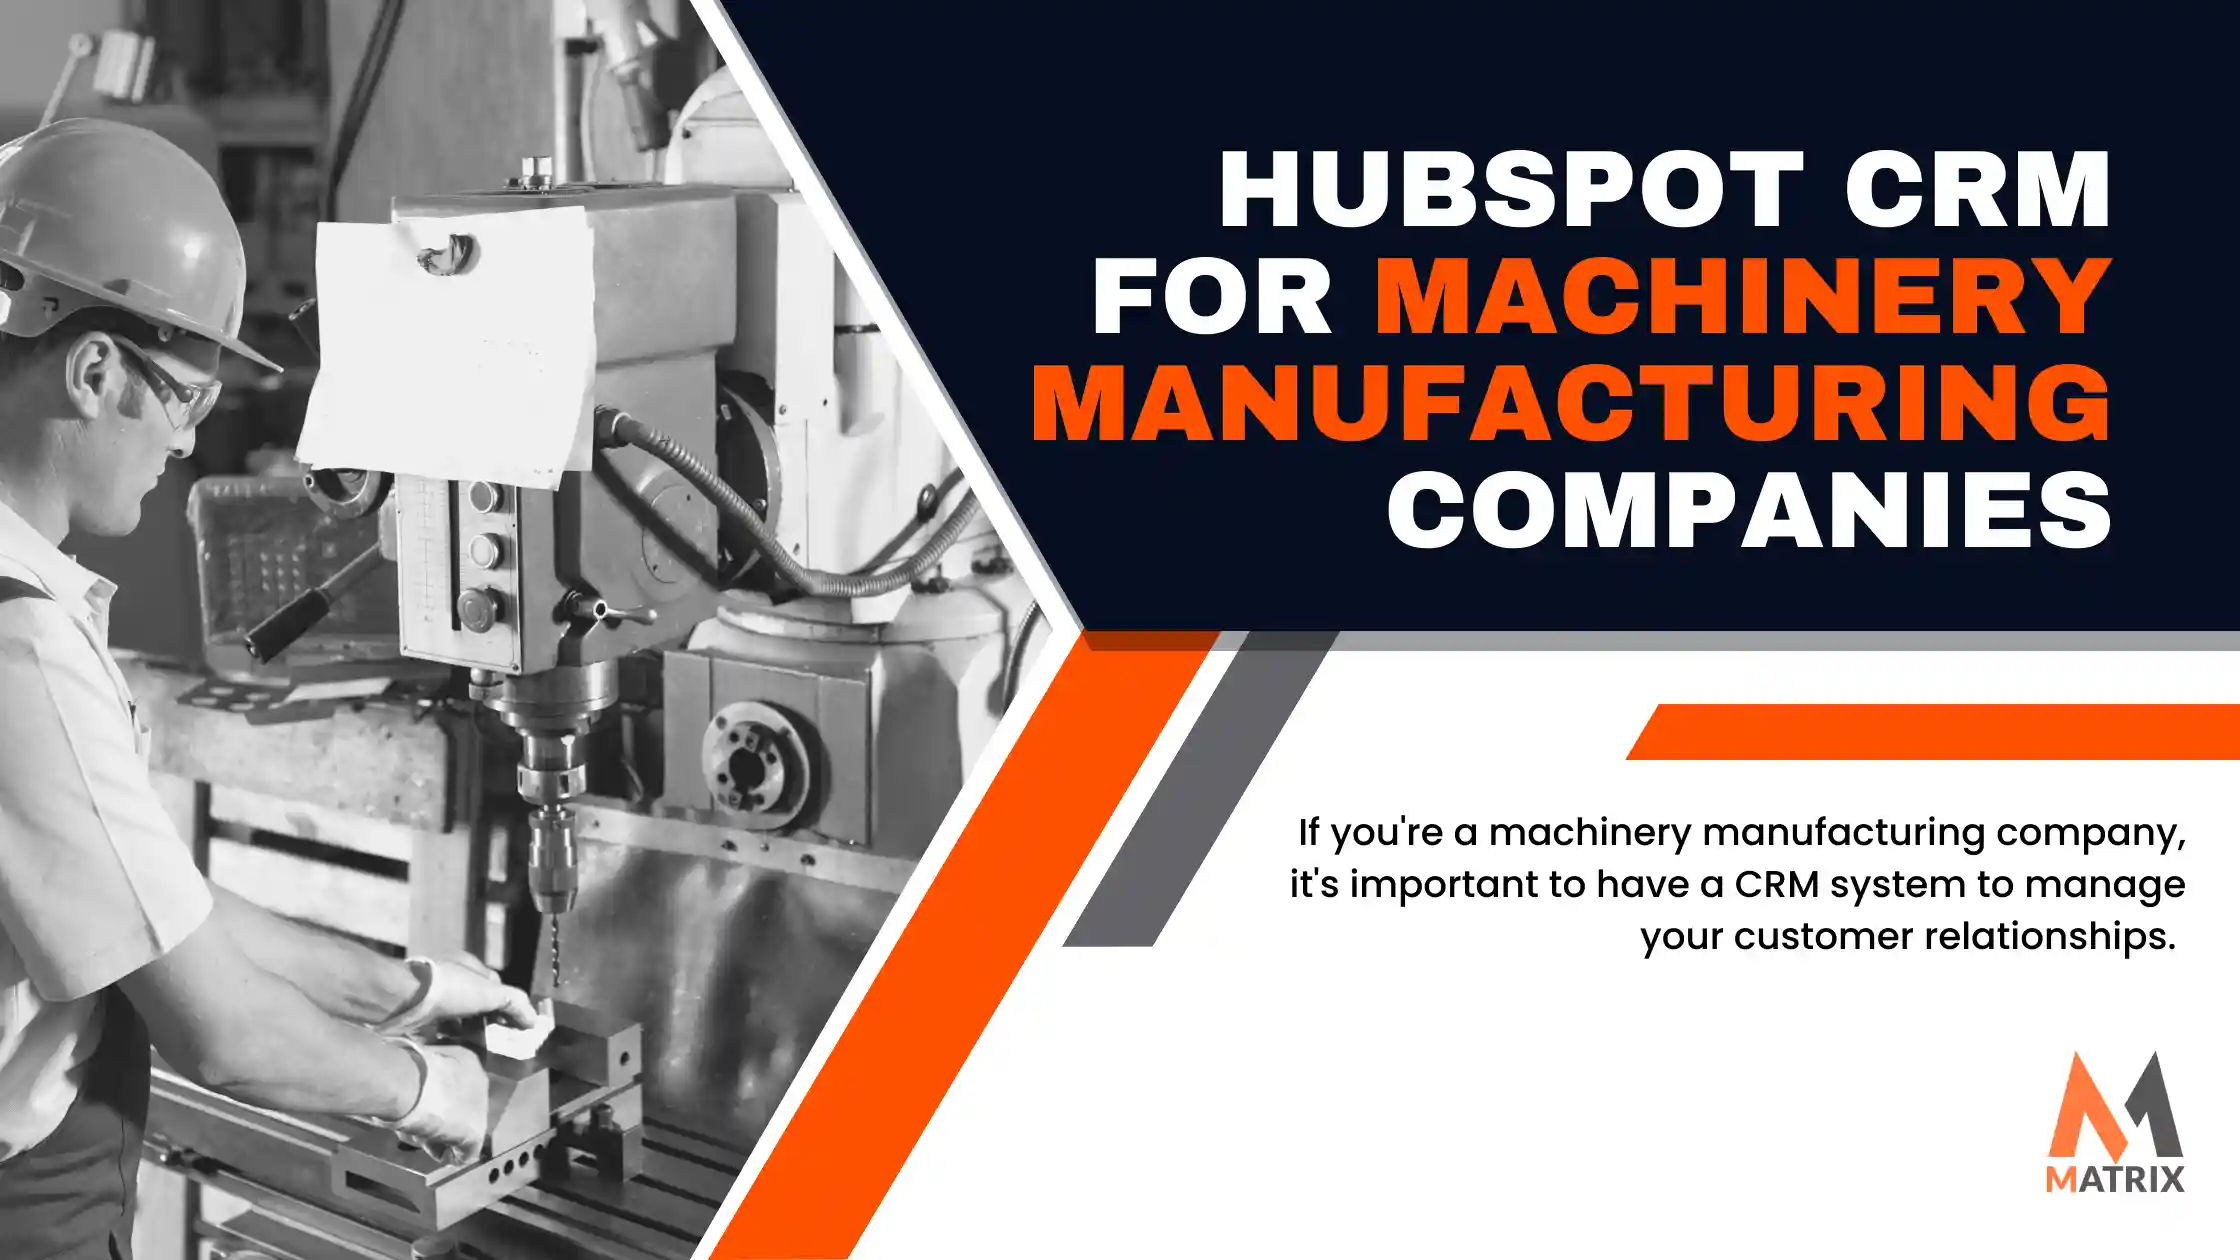 HubSpot CRM Machinery Manufacturing Companies